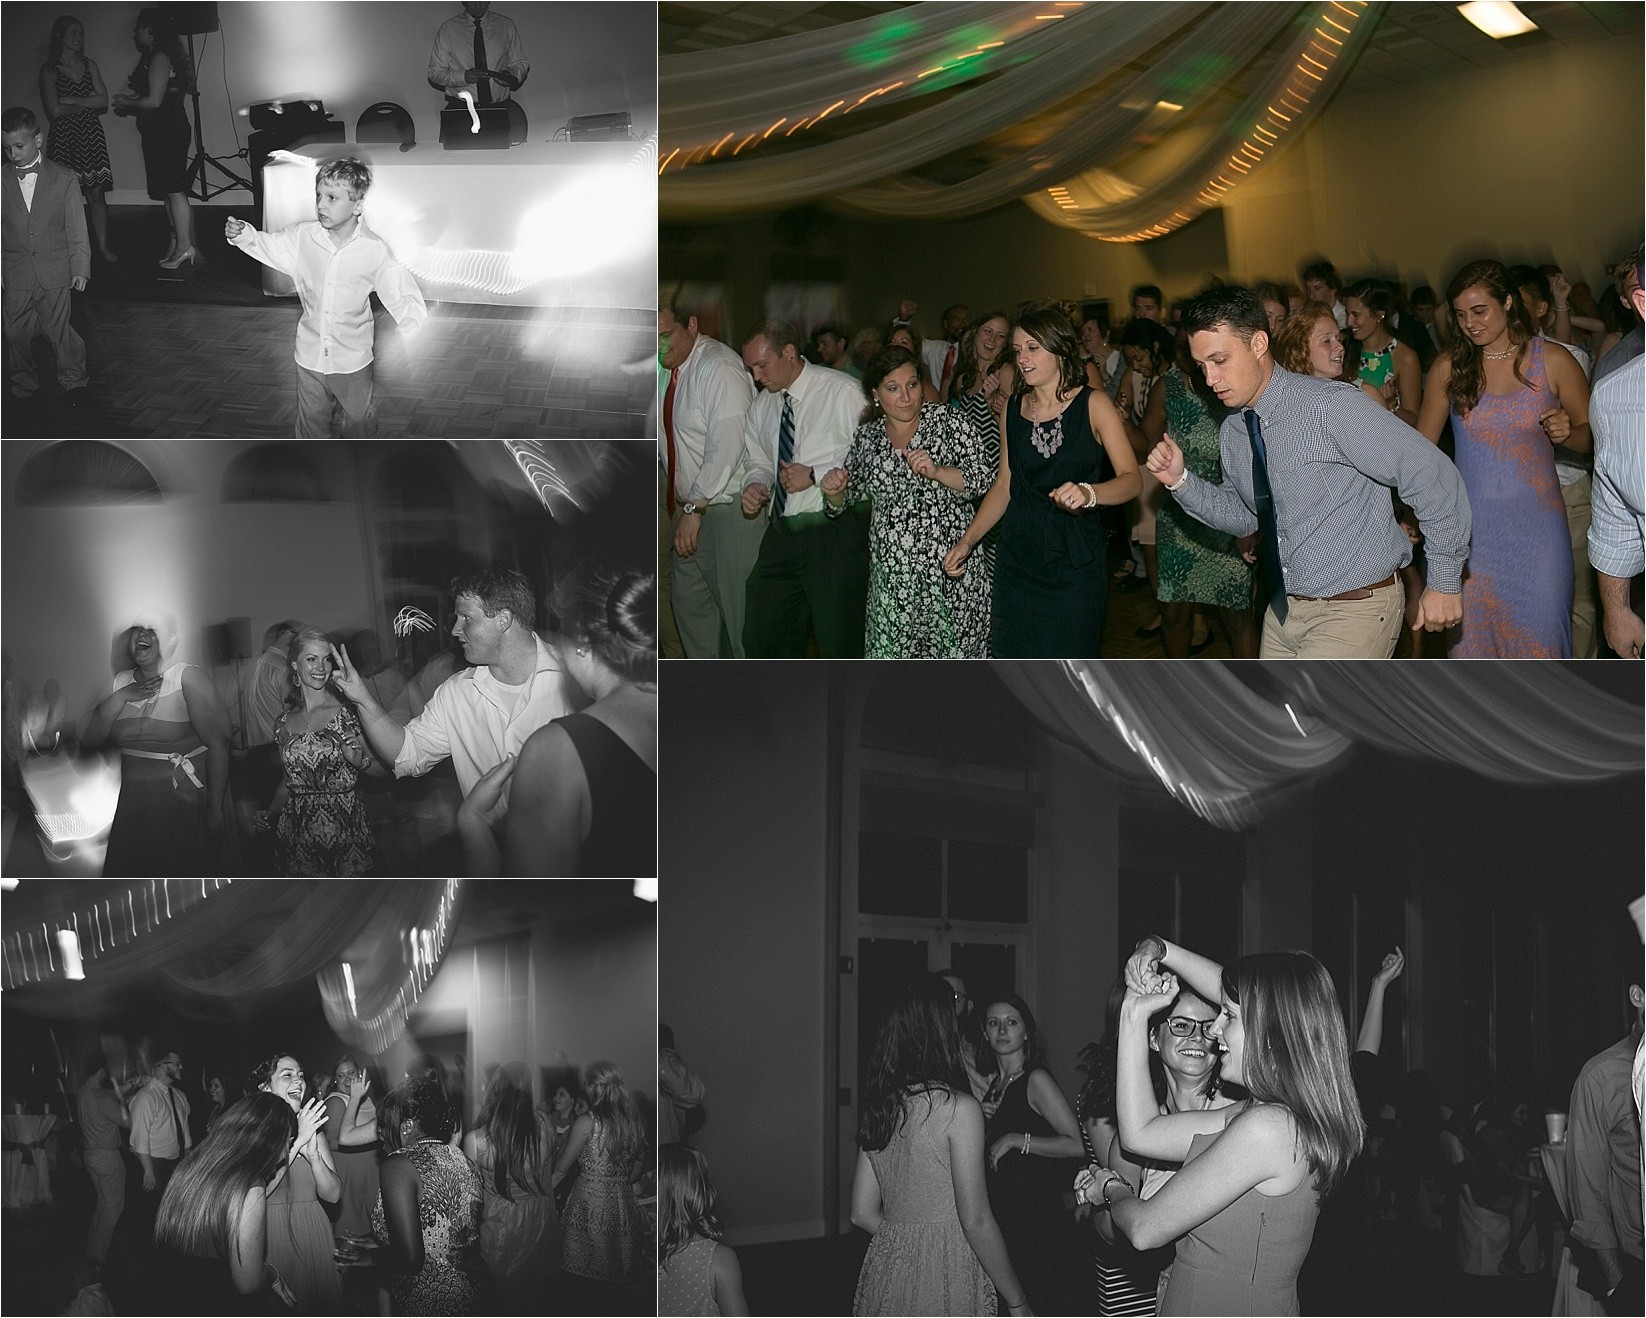 Shutter Drag dance at the davidson college chapel wedding in Davidson north Carolina and the Charles mack citizen center wedding and reception